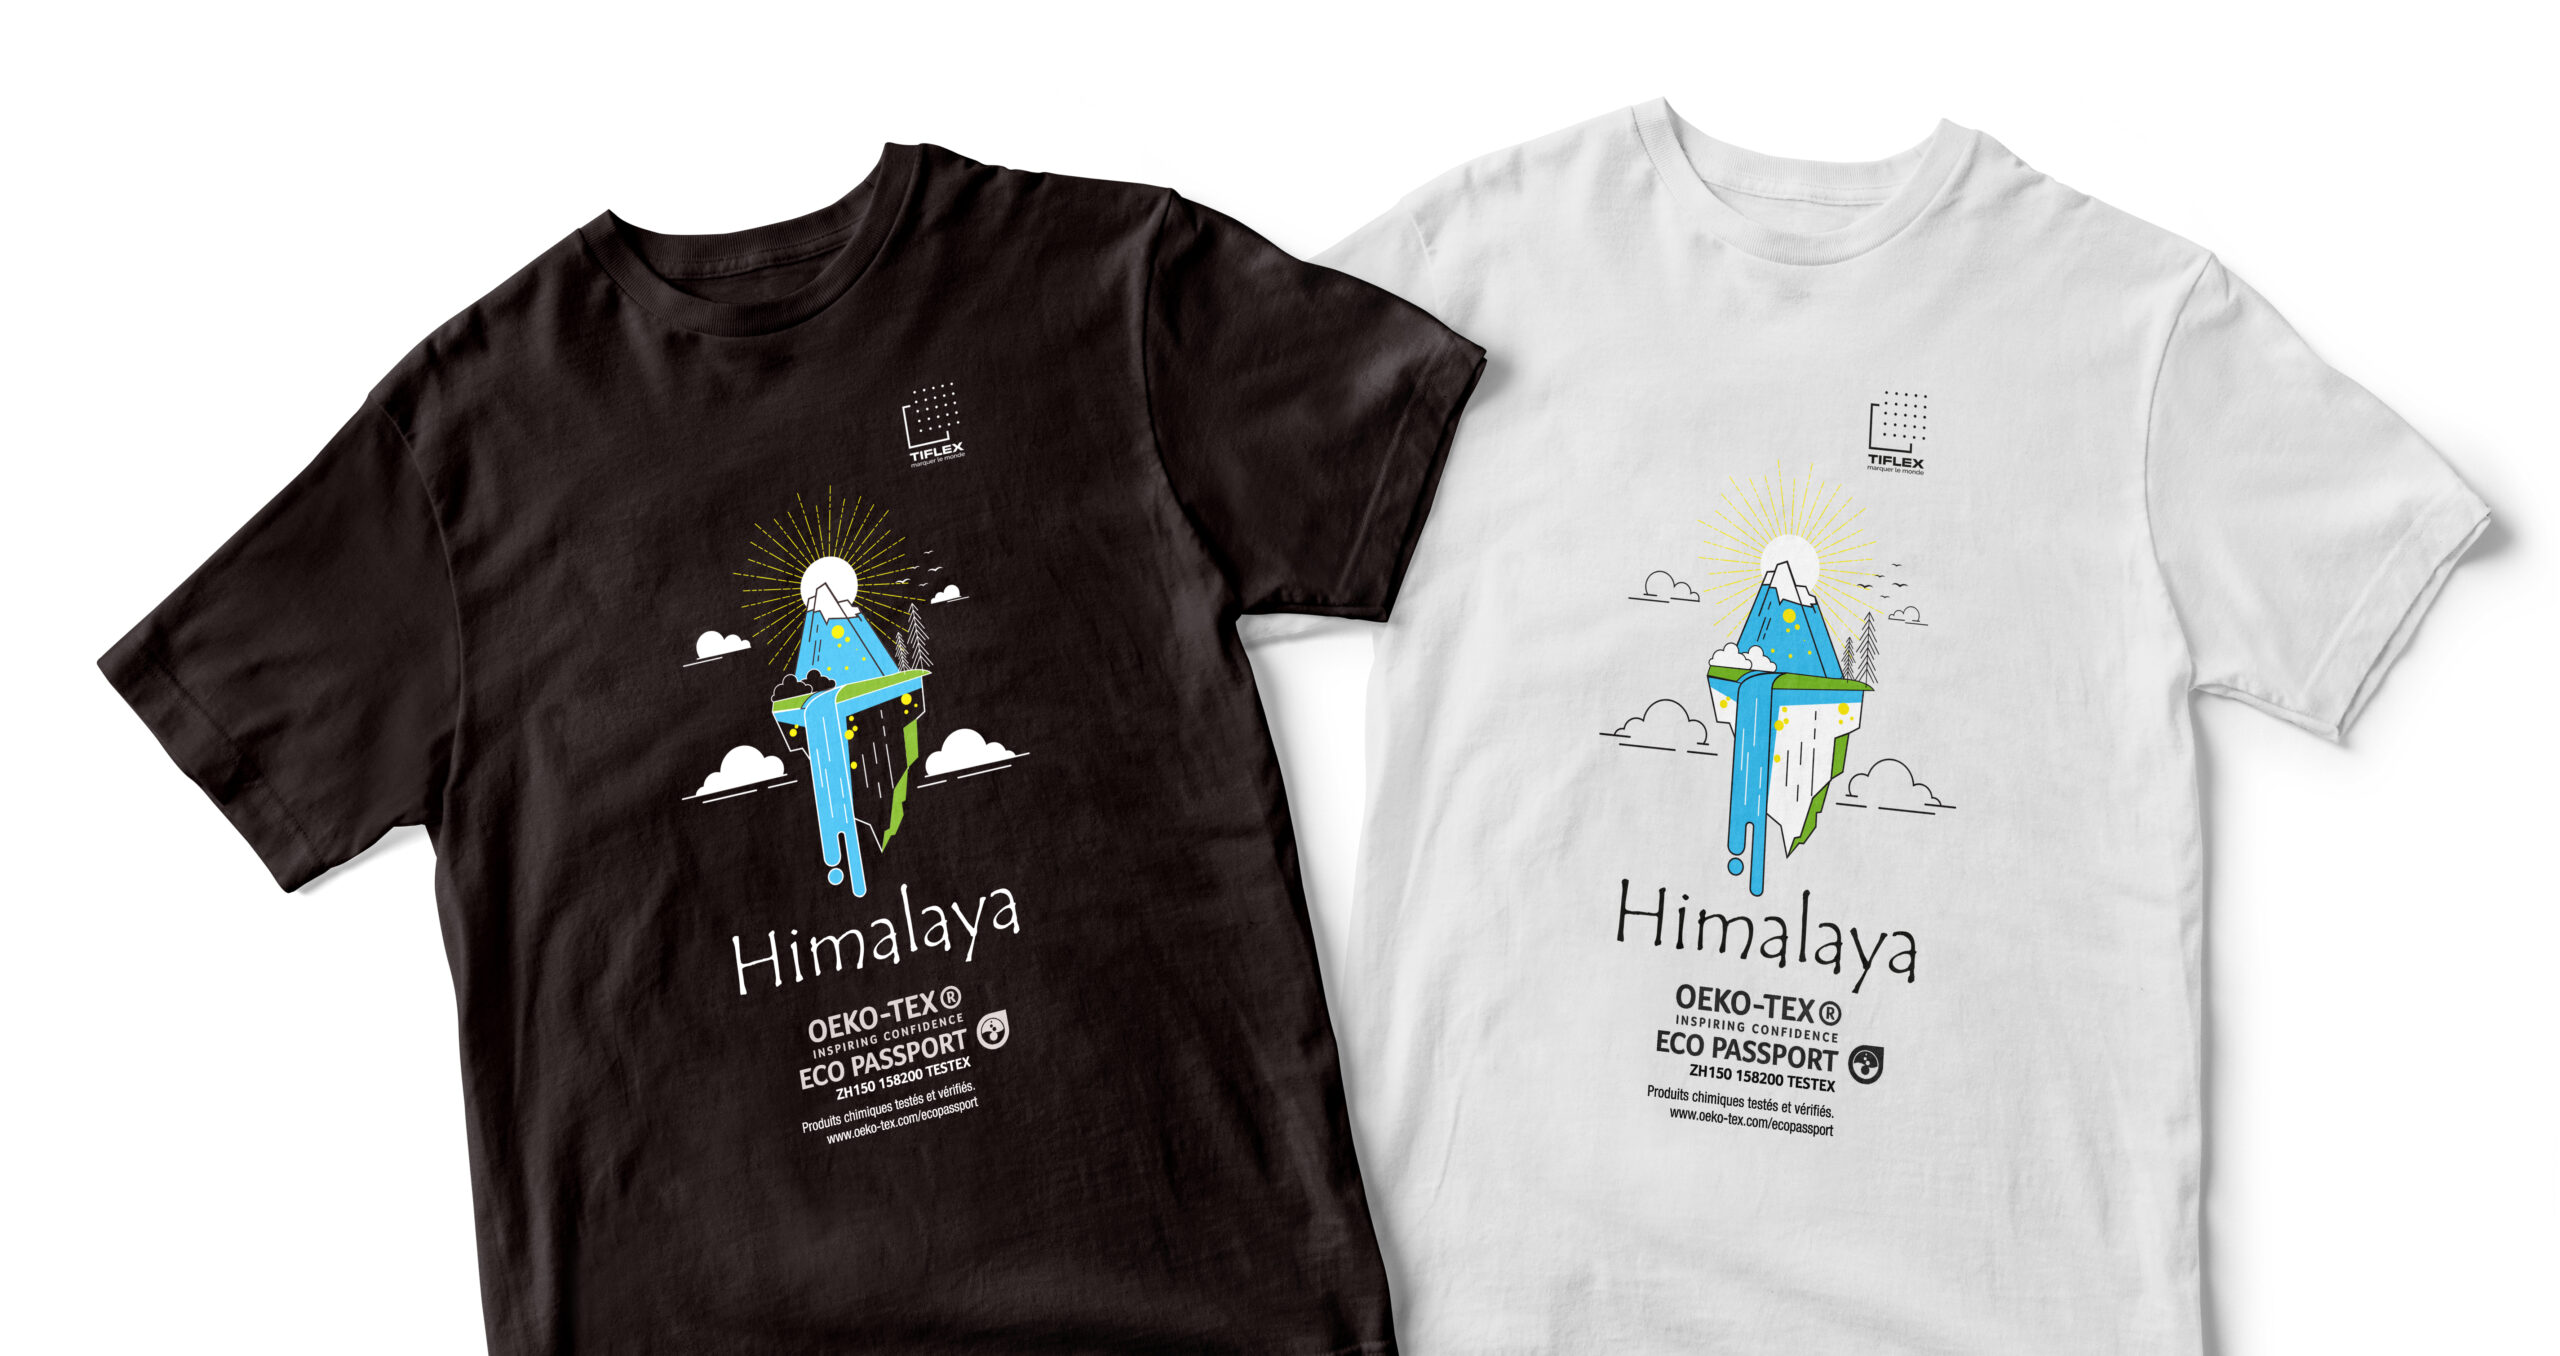 Himalaya - Colors printing on black and white textiles - Low cure plastisol ink